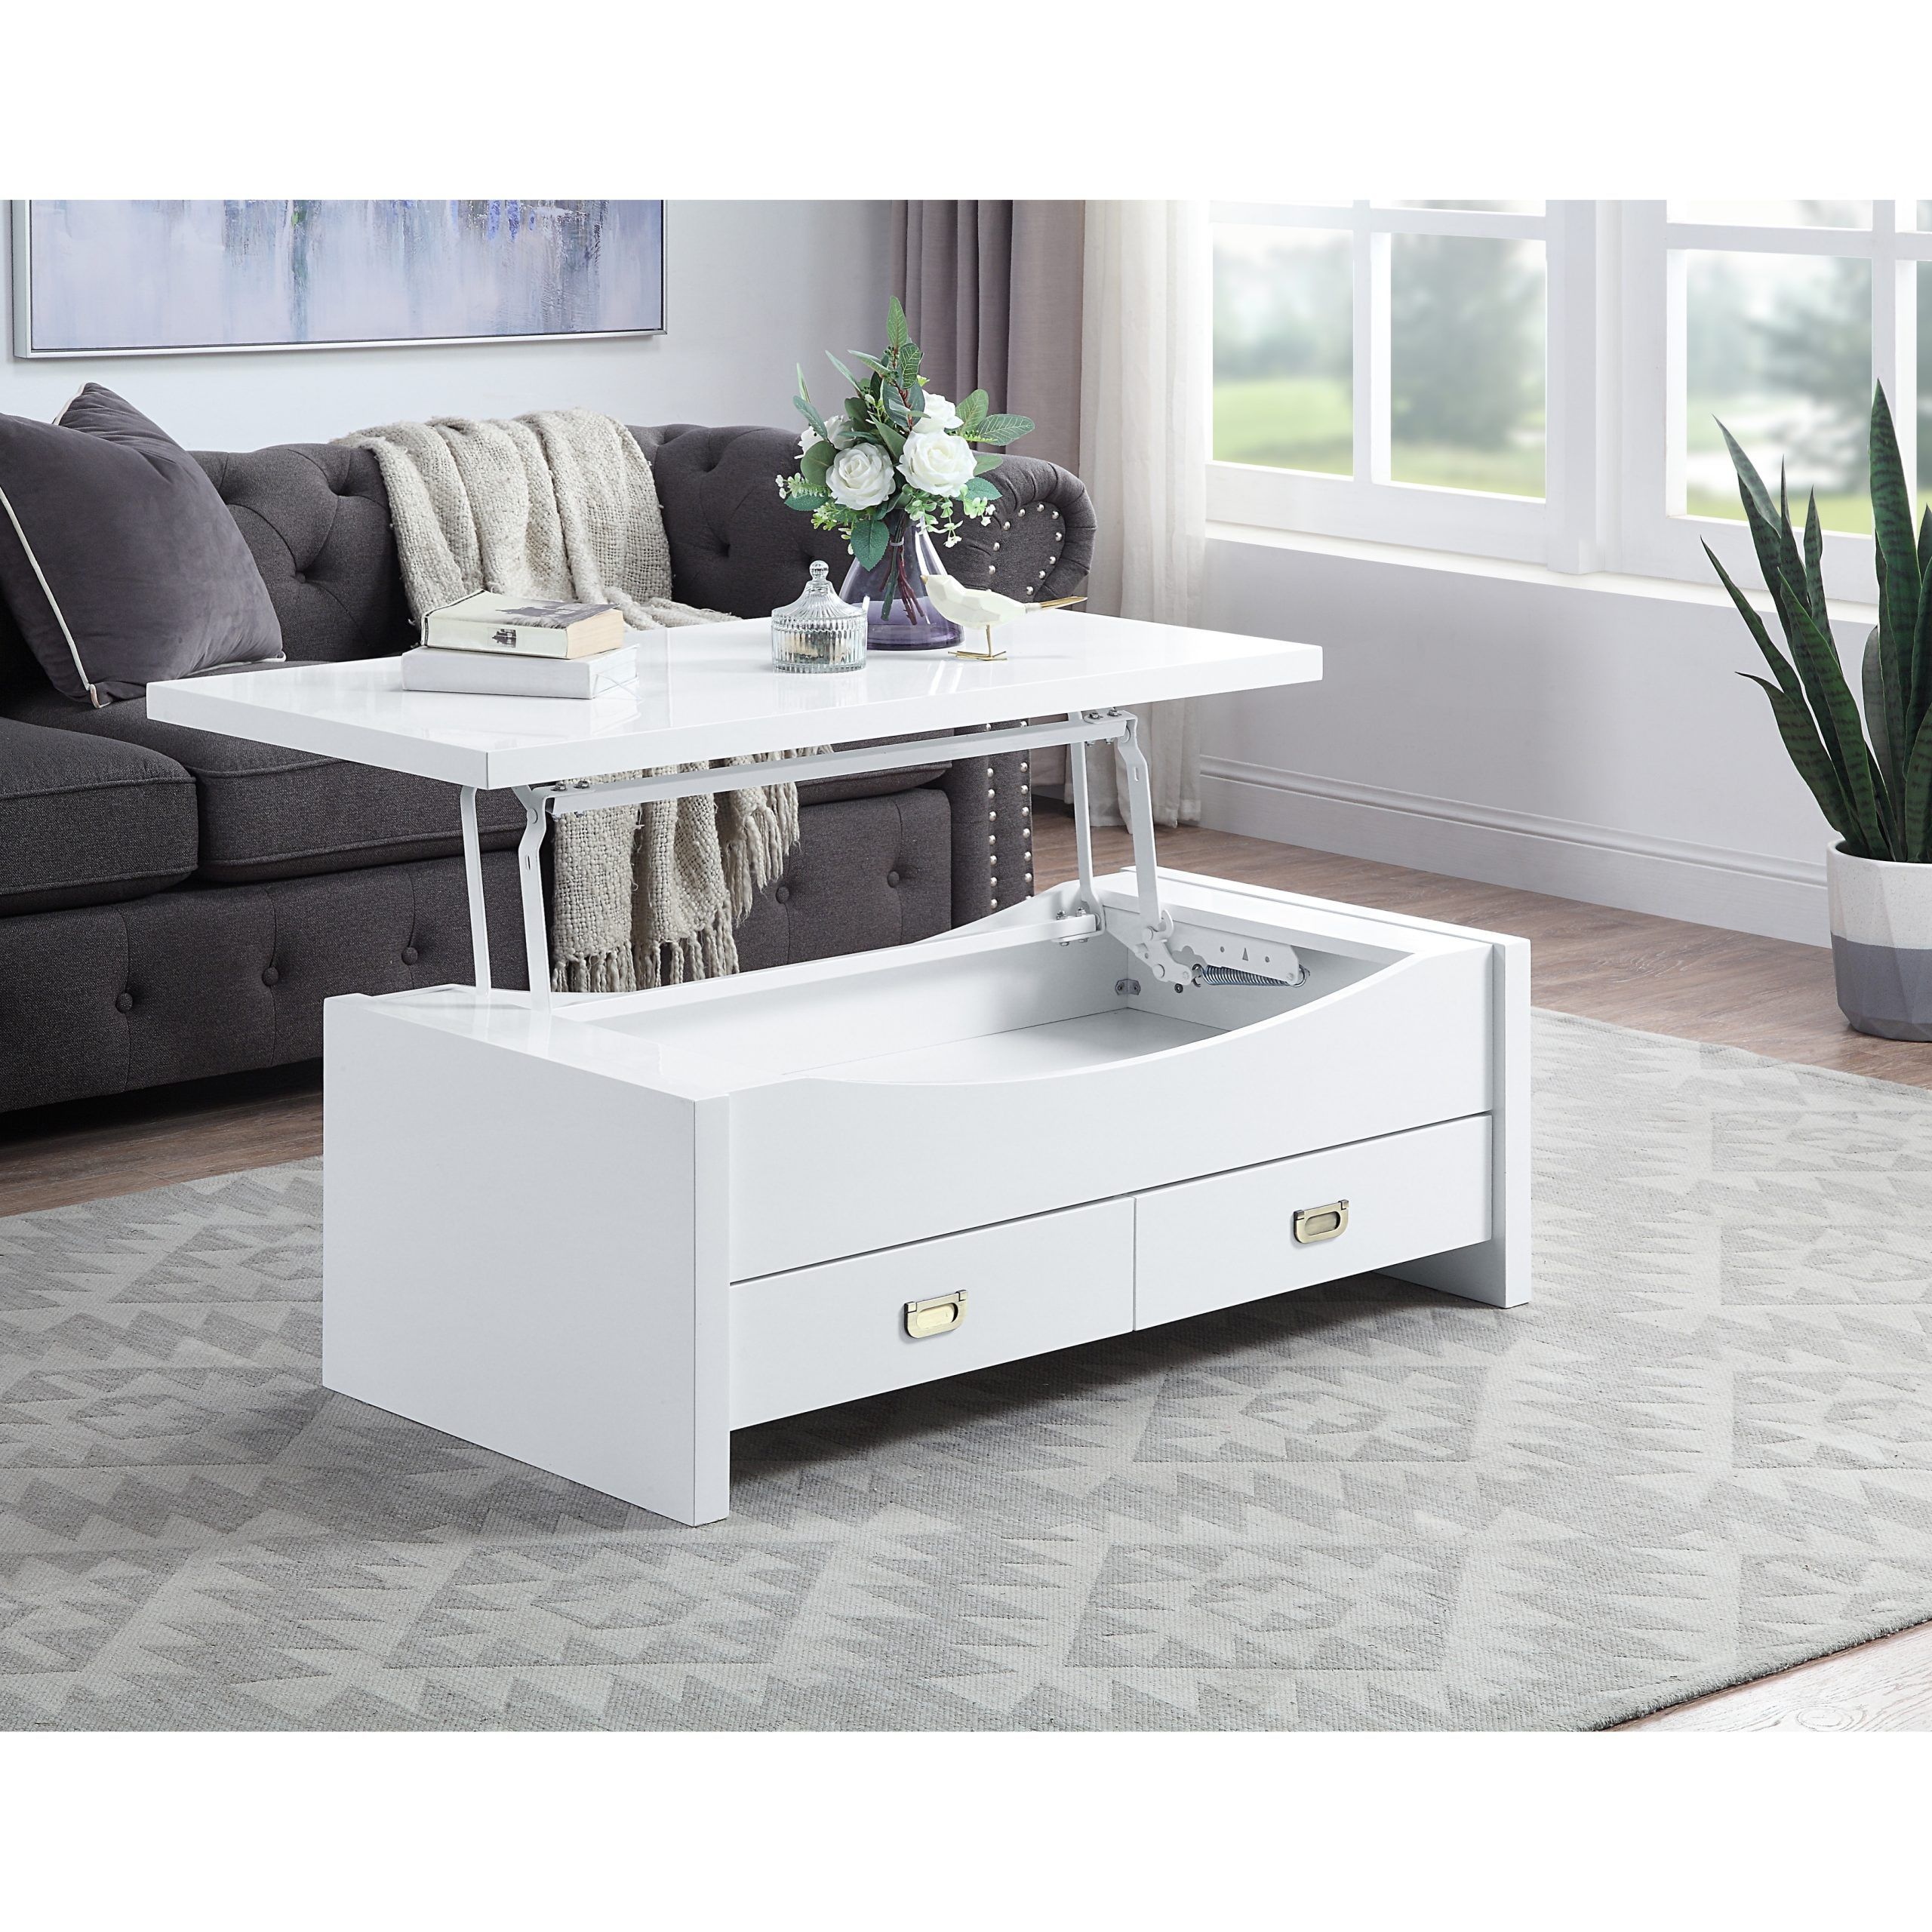 Aoolive Lift Top Coffee Table With Drawers In High Gloss White Finish – On  Sale – Bed Bath & Beyond – 35561340 Intended For High Gloss Lift Top Coffee Tables (View 11 of 15)